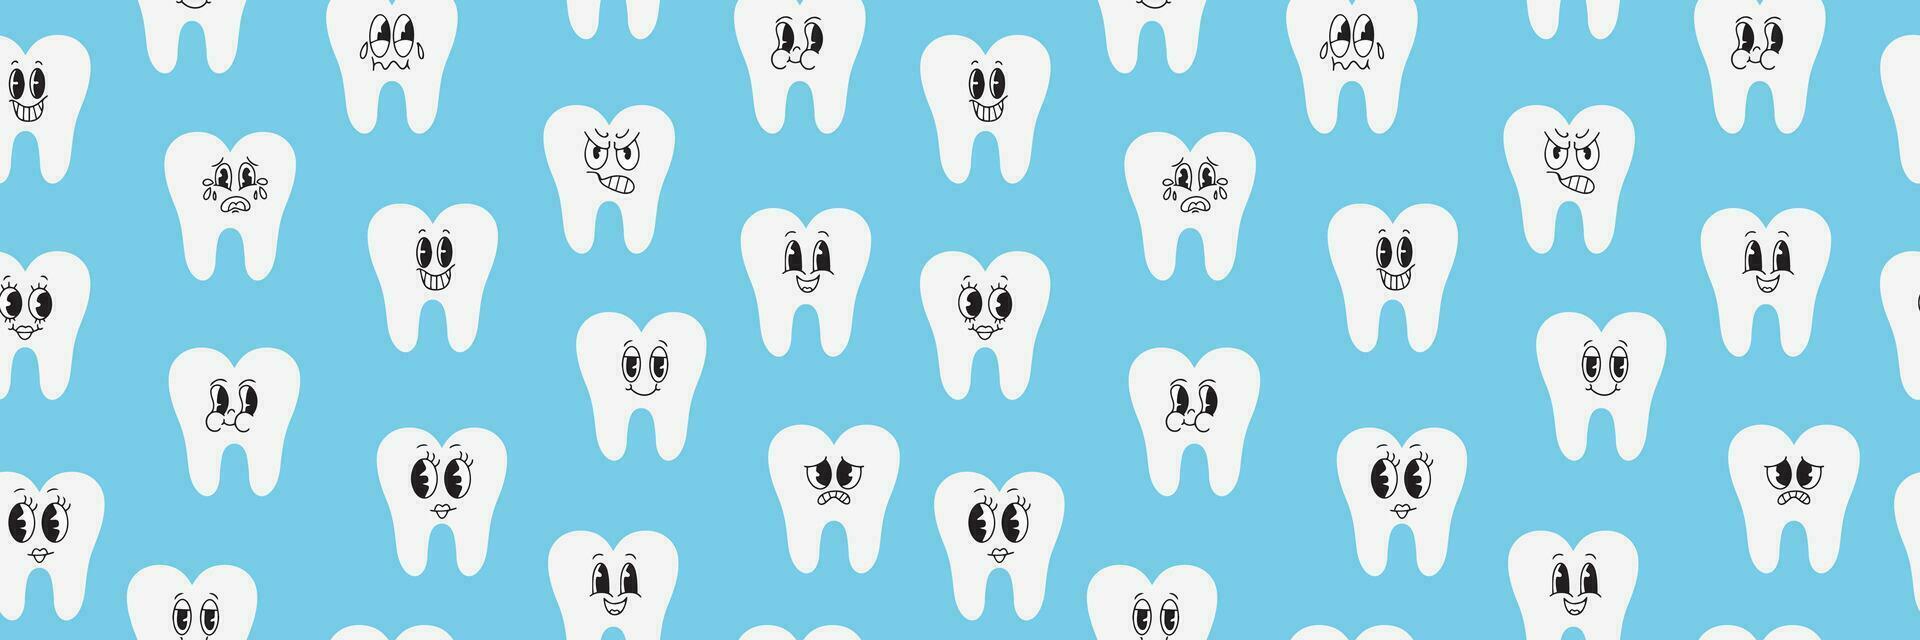 Seamless pattern with cute teeth. White teeth in kawaii style. Dental cute background. Illustration for a pediatric dentist's office, pediatric dentistry. Vector. Vector illustration